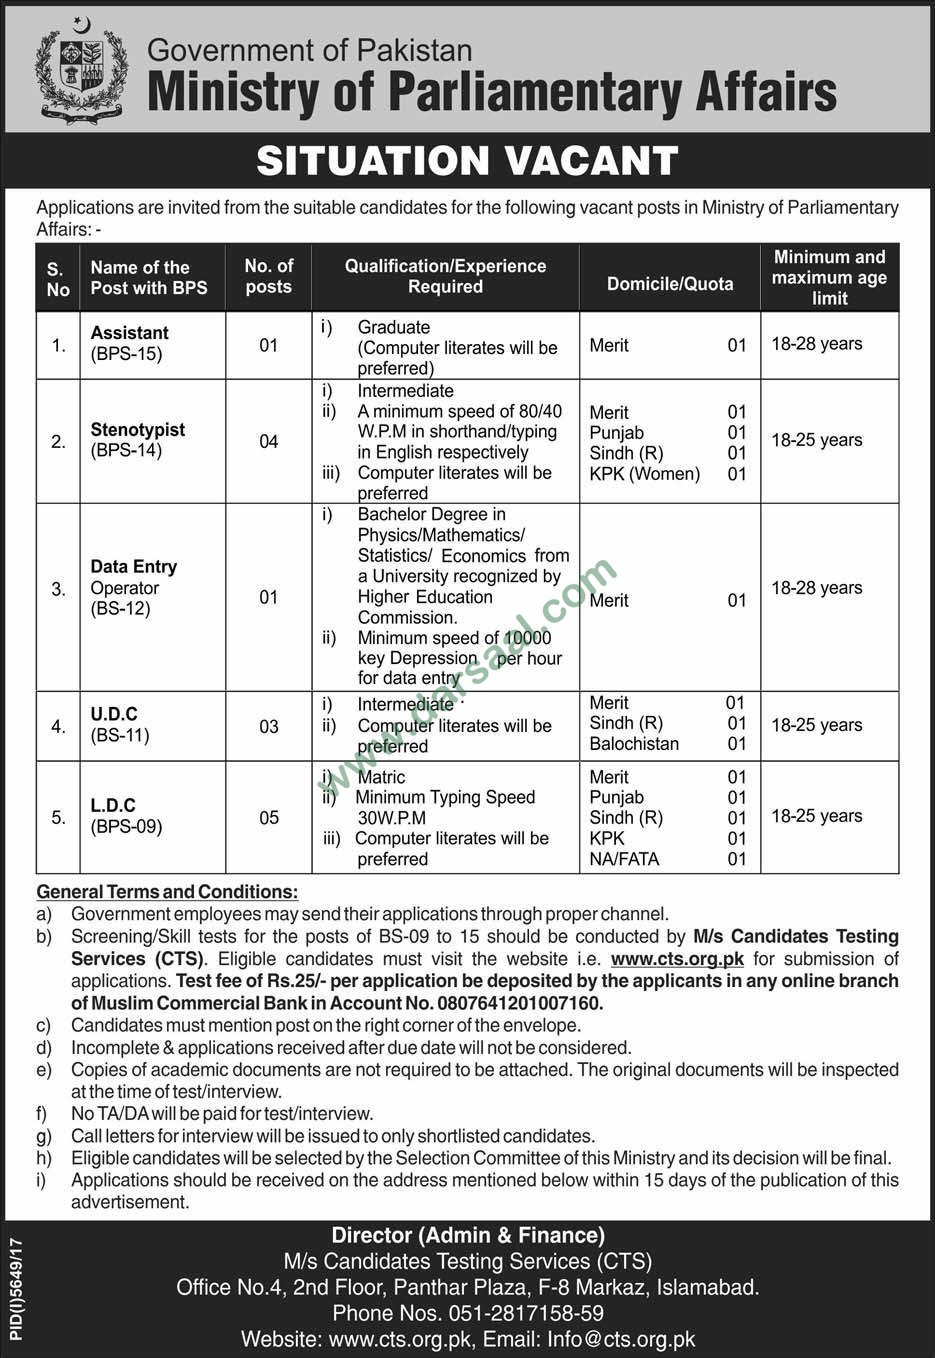 UDC, LDC, Data Entry Operator, Assistant, Steno Typist Jobs in Ministry of Parliamentary Affairs Islamabad, 12 April 2018